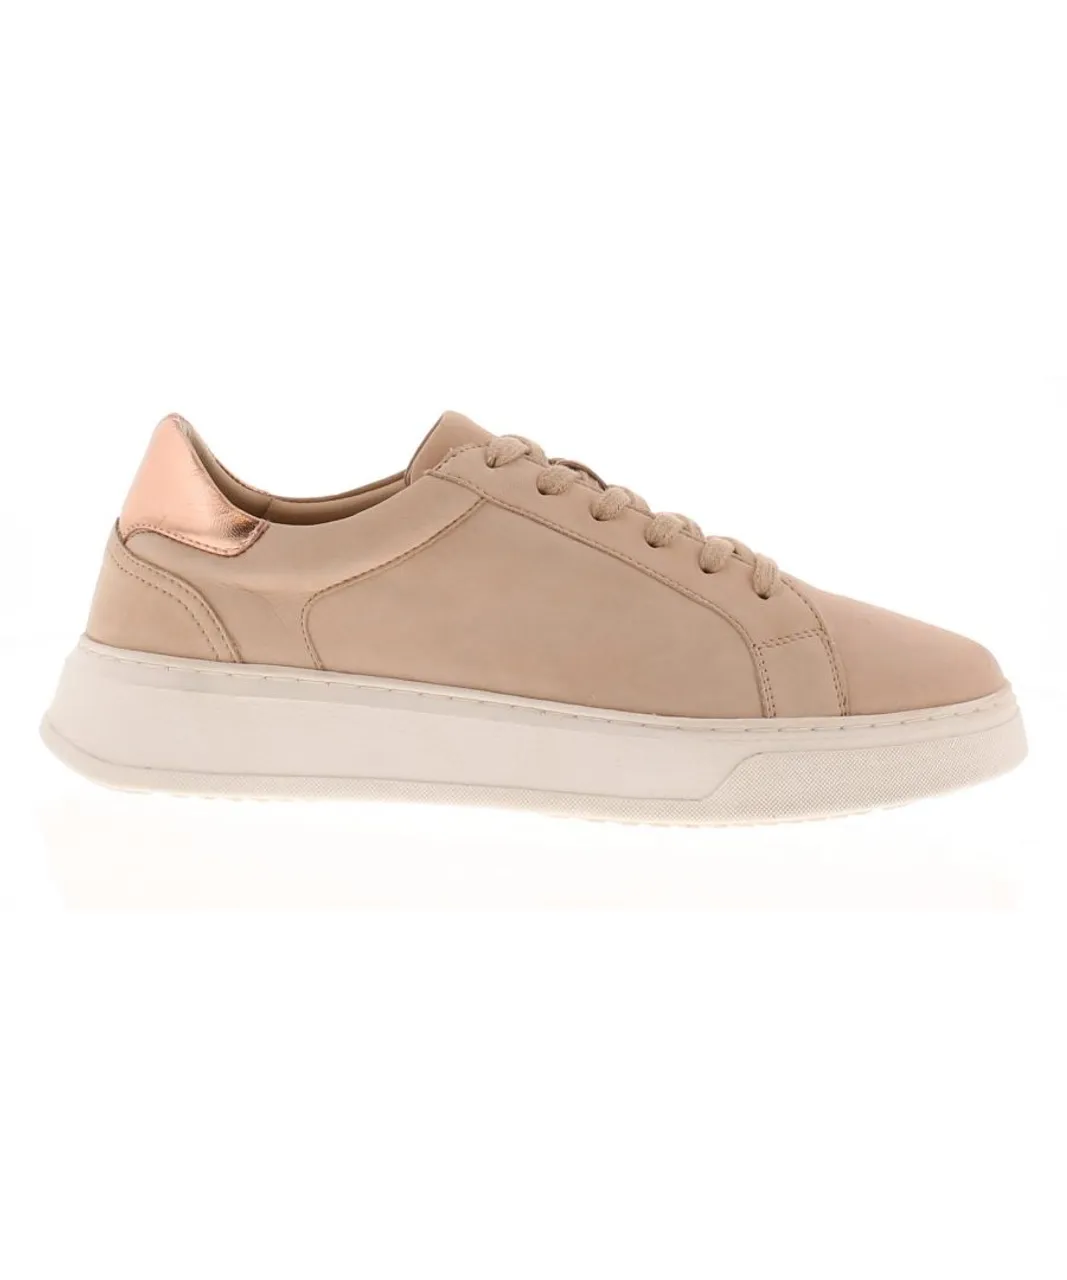 Hush Puppies Womens Trainers Chunky Camille Nubuck Leather Lace Up blush - Pink